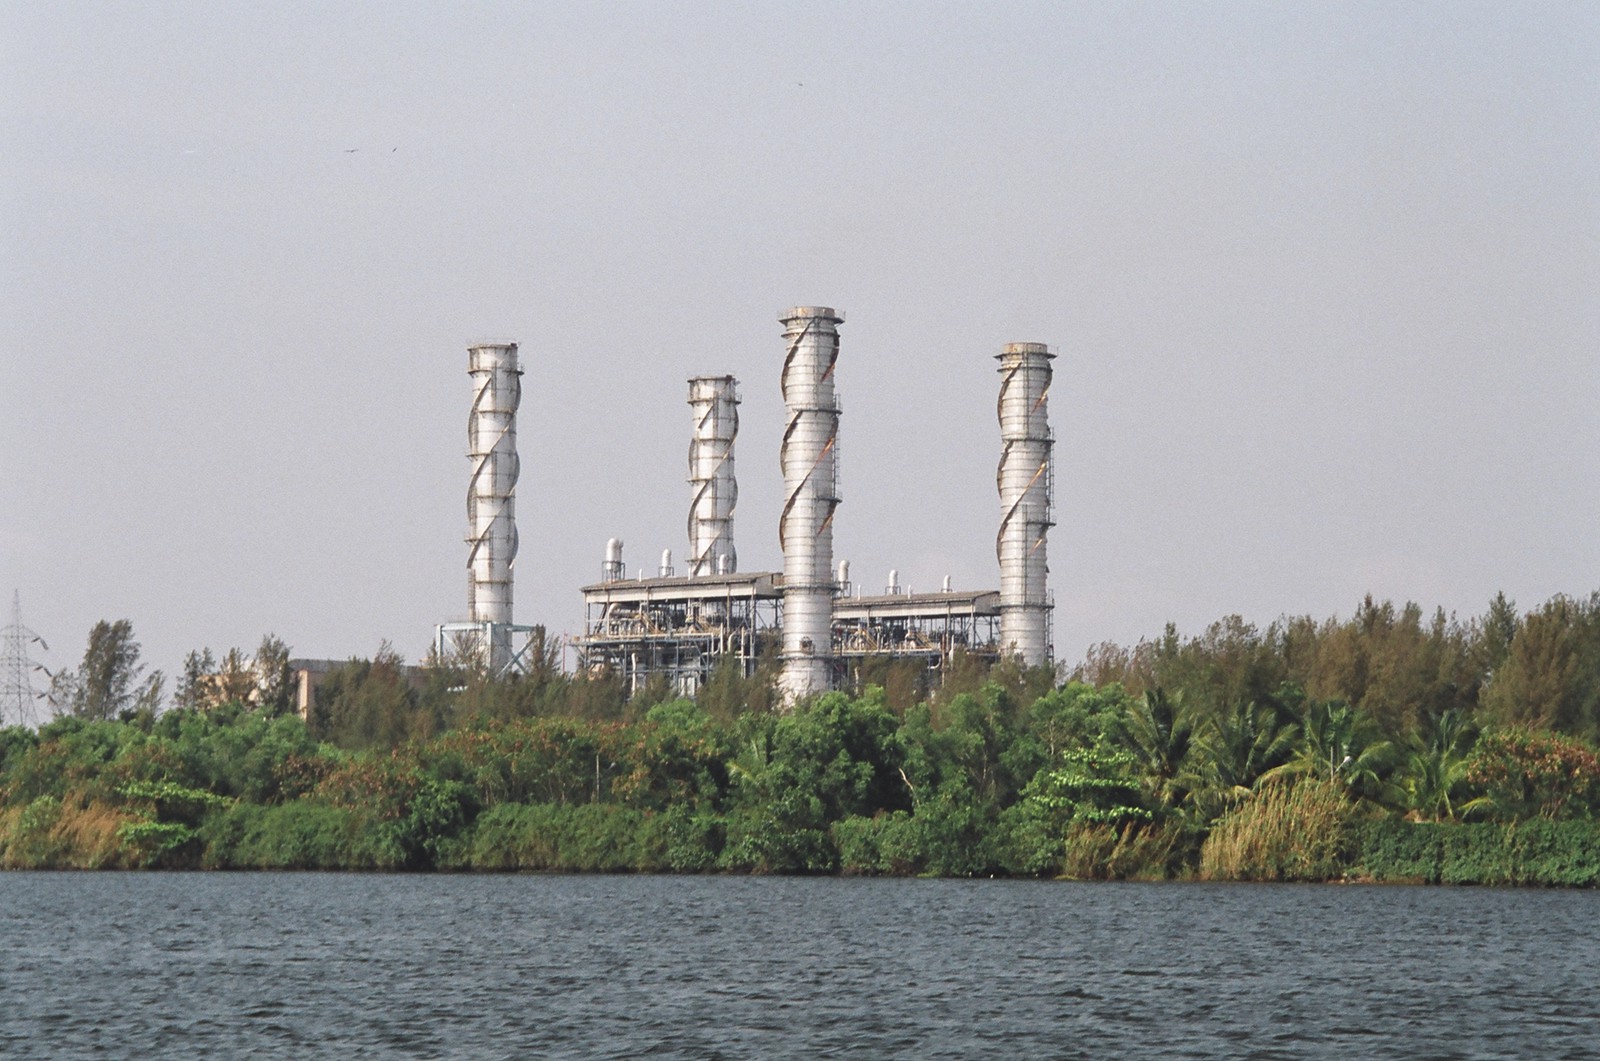 A power station on the backwaters